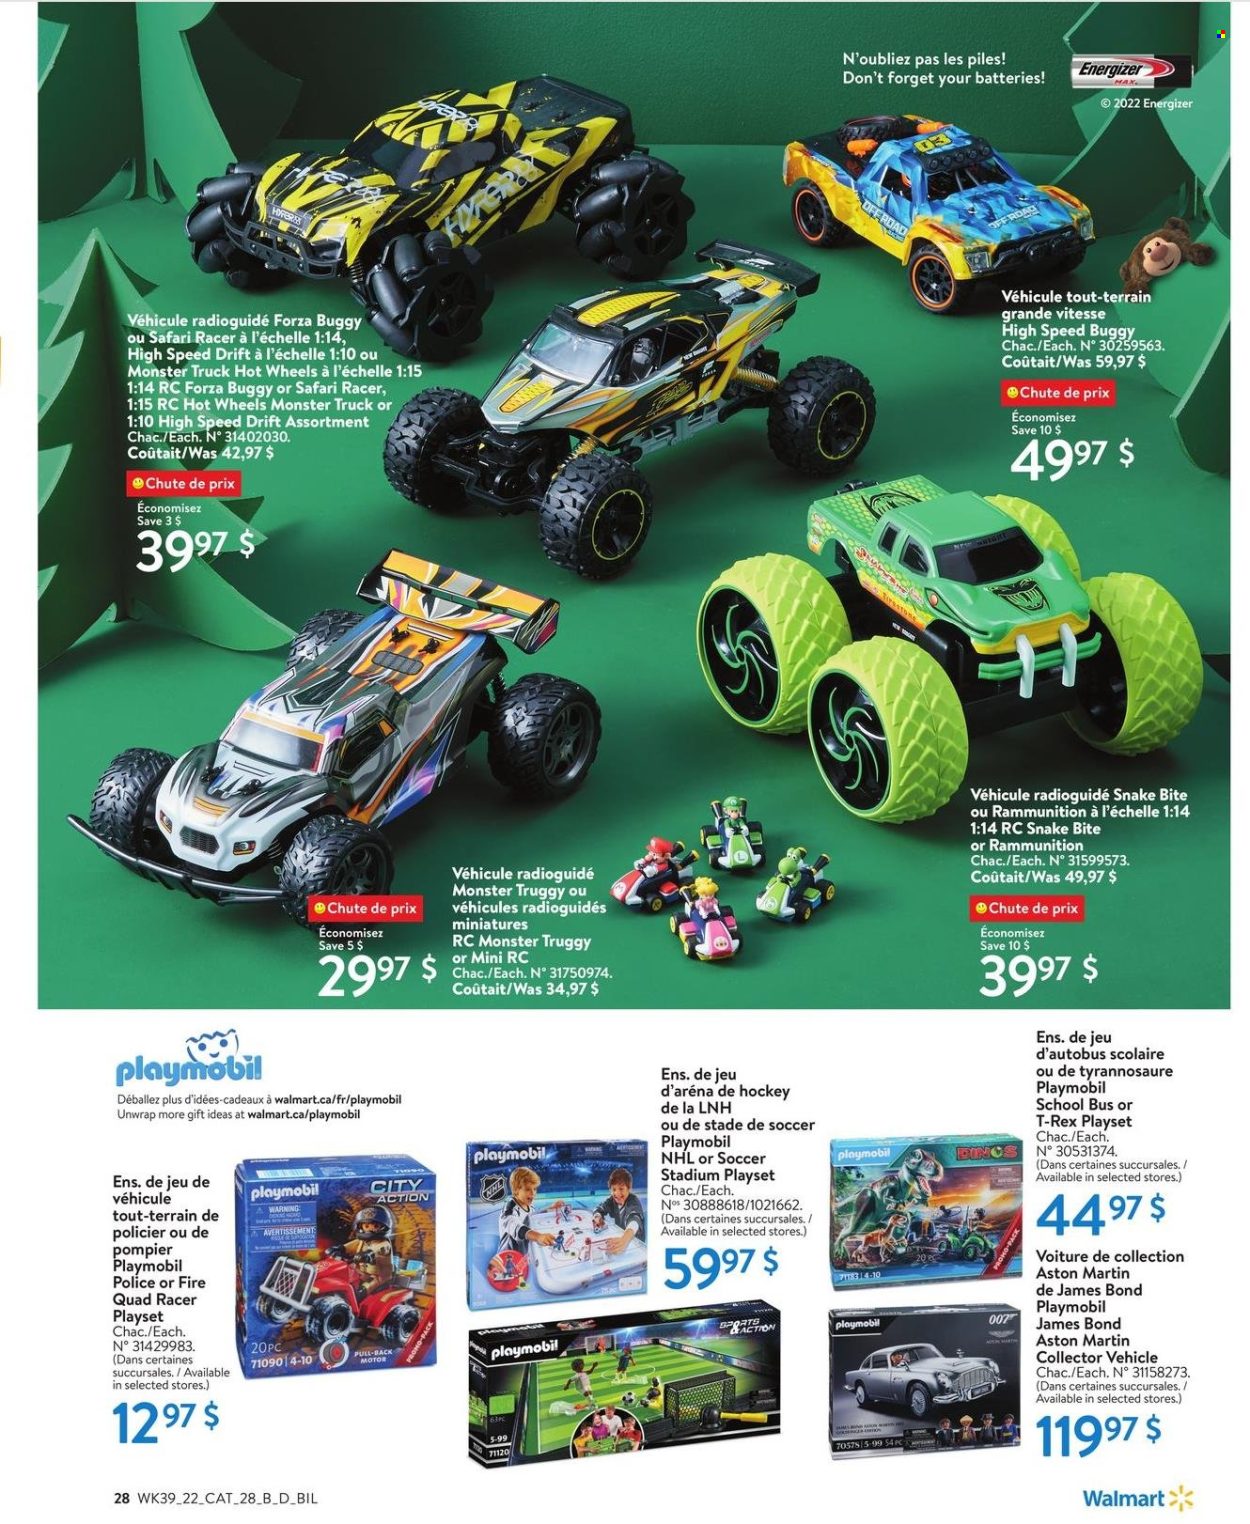 thumbnail - Walmart Flyer - October 20, 2022 - December 24, 2022 - Sales products - Monster, Hot Wheels, James Bond, Speed Buggy, play set, vehicle, buggy, Firestone, Energizer, Playmobil. Page 29.